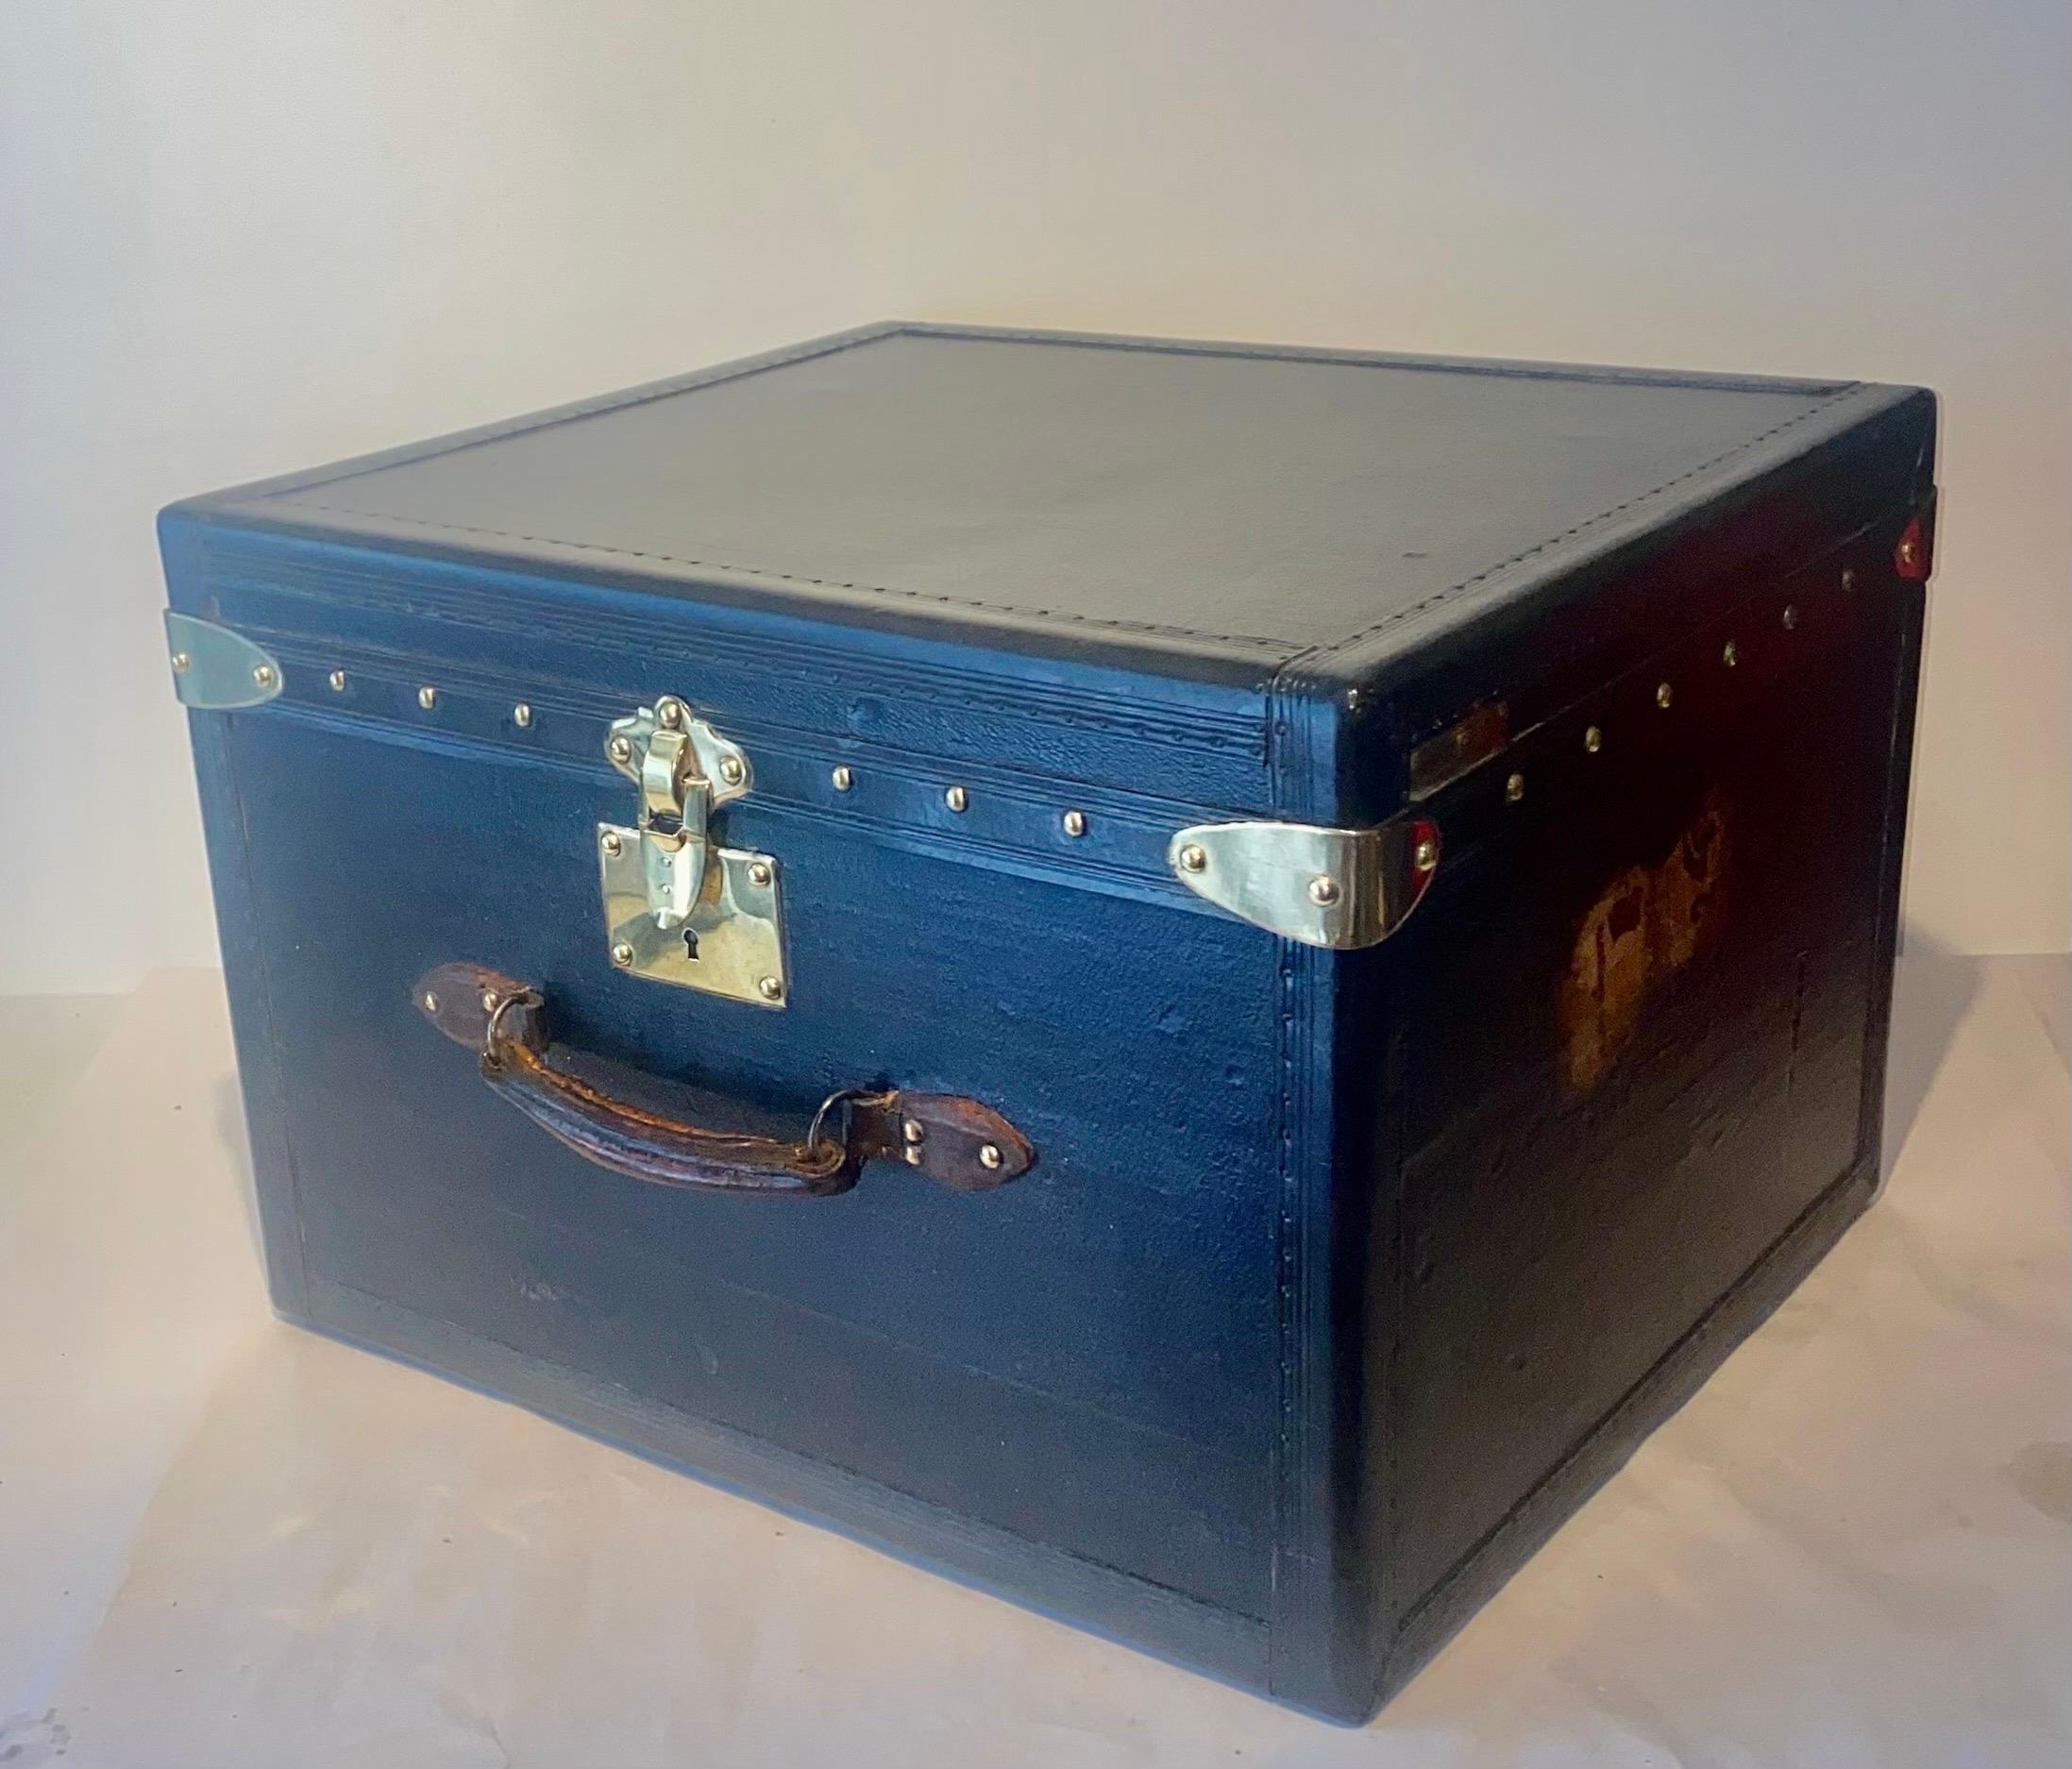 Ladies’ hat trunk. Hat trunks are very high in demand because of their cubic shape, that makes them ideal as nightstands, or to fill corners between sofas.
Original inside plateau. This is a antique early-20th Century Goyard hat trunk in very good